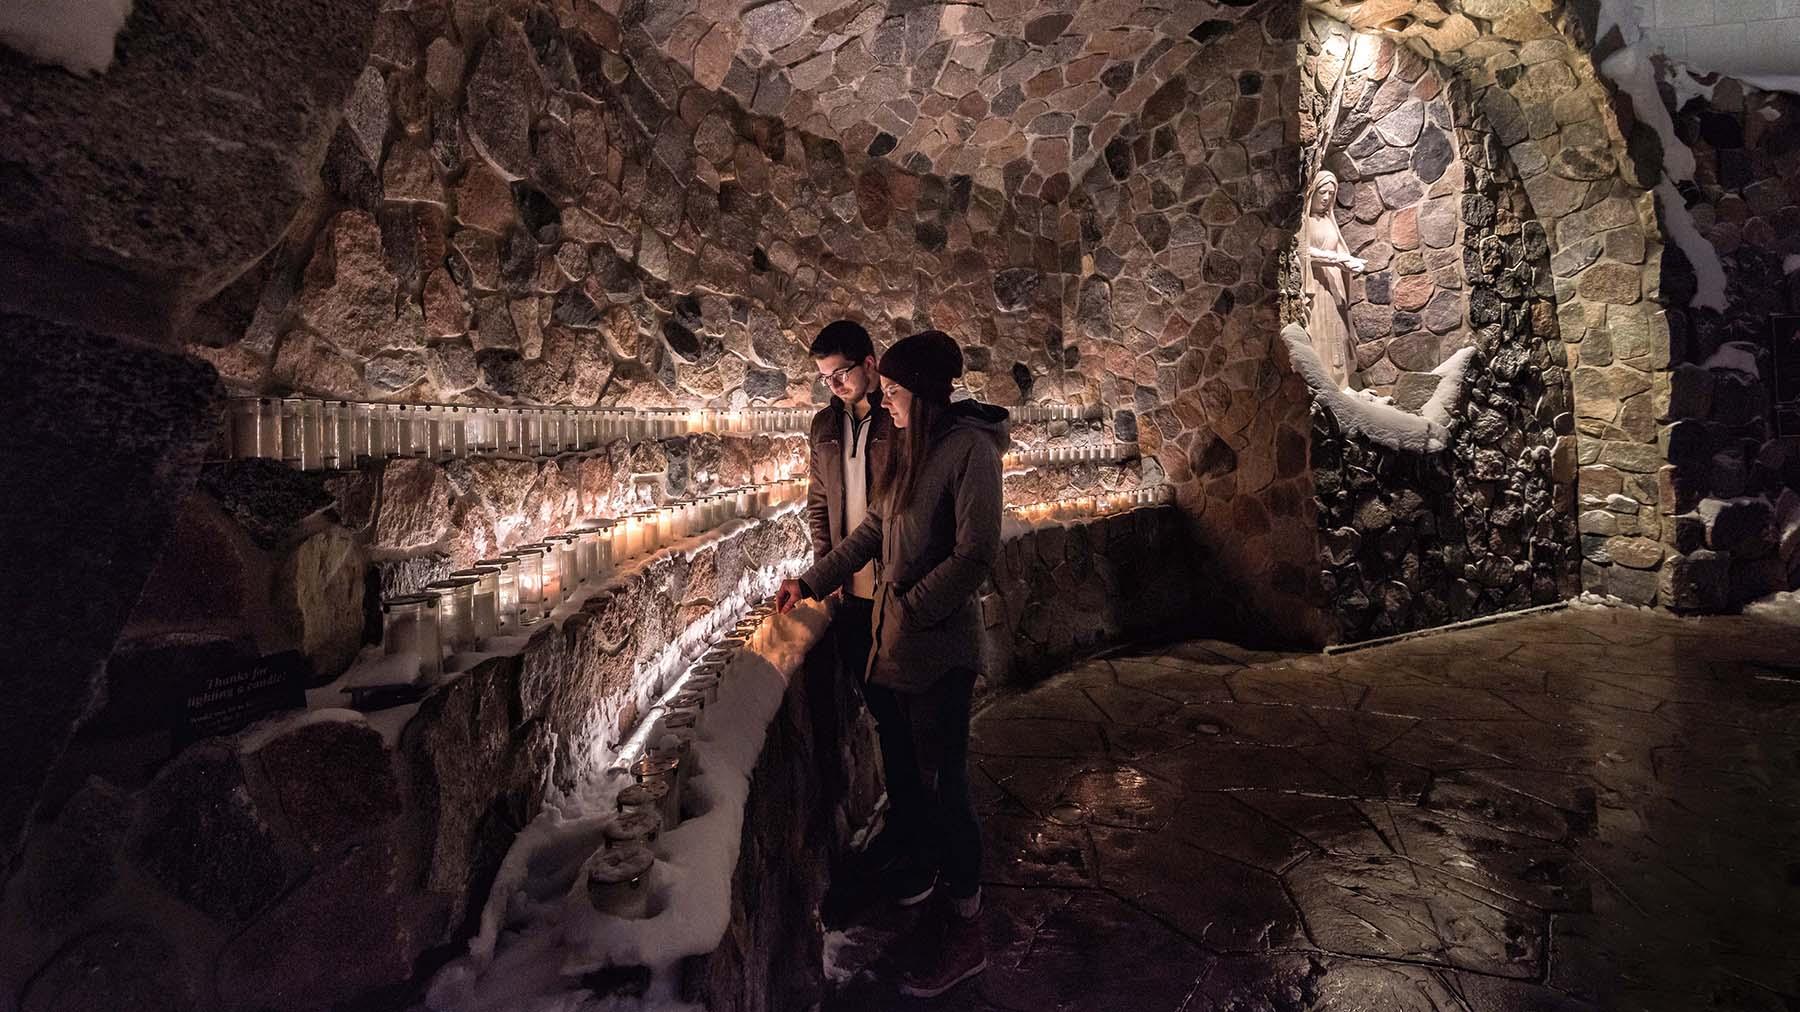 Two students lighting a candle in the grotto 